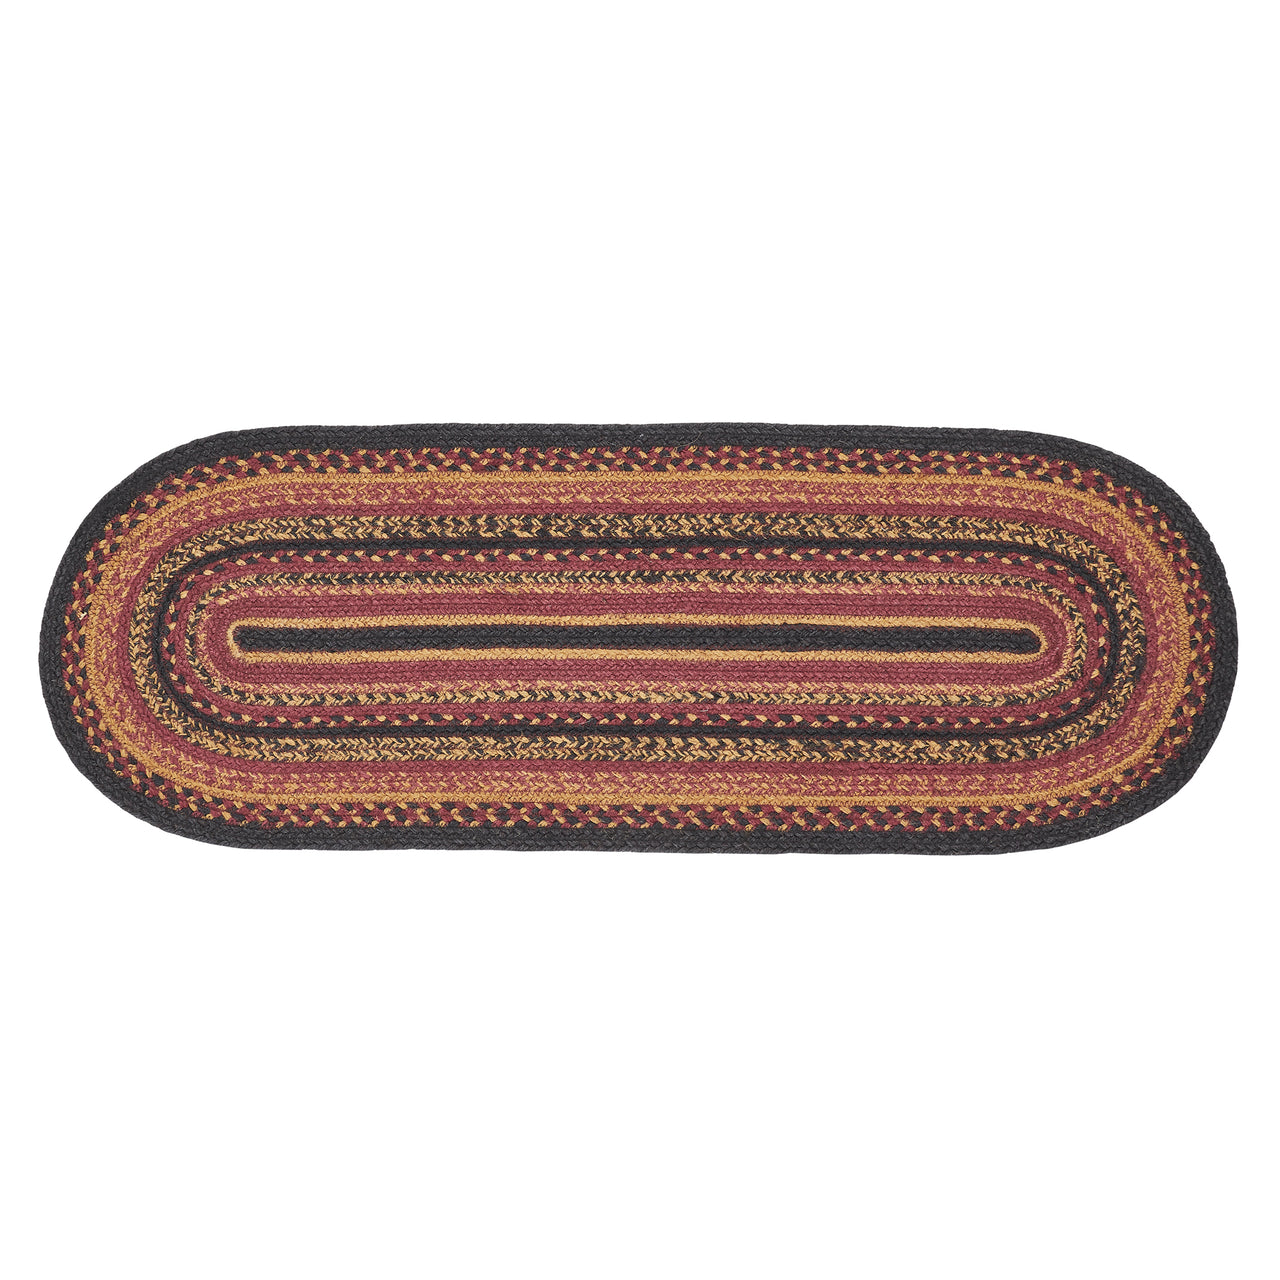 Heritage Farms Jute Oval Runner 13x36 VHC Brands